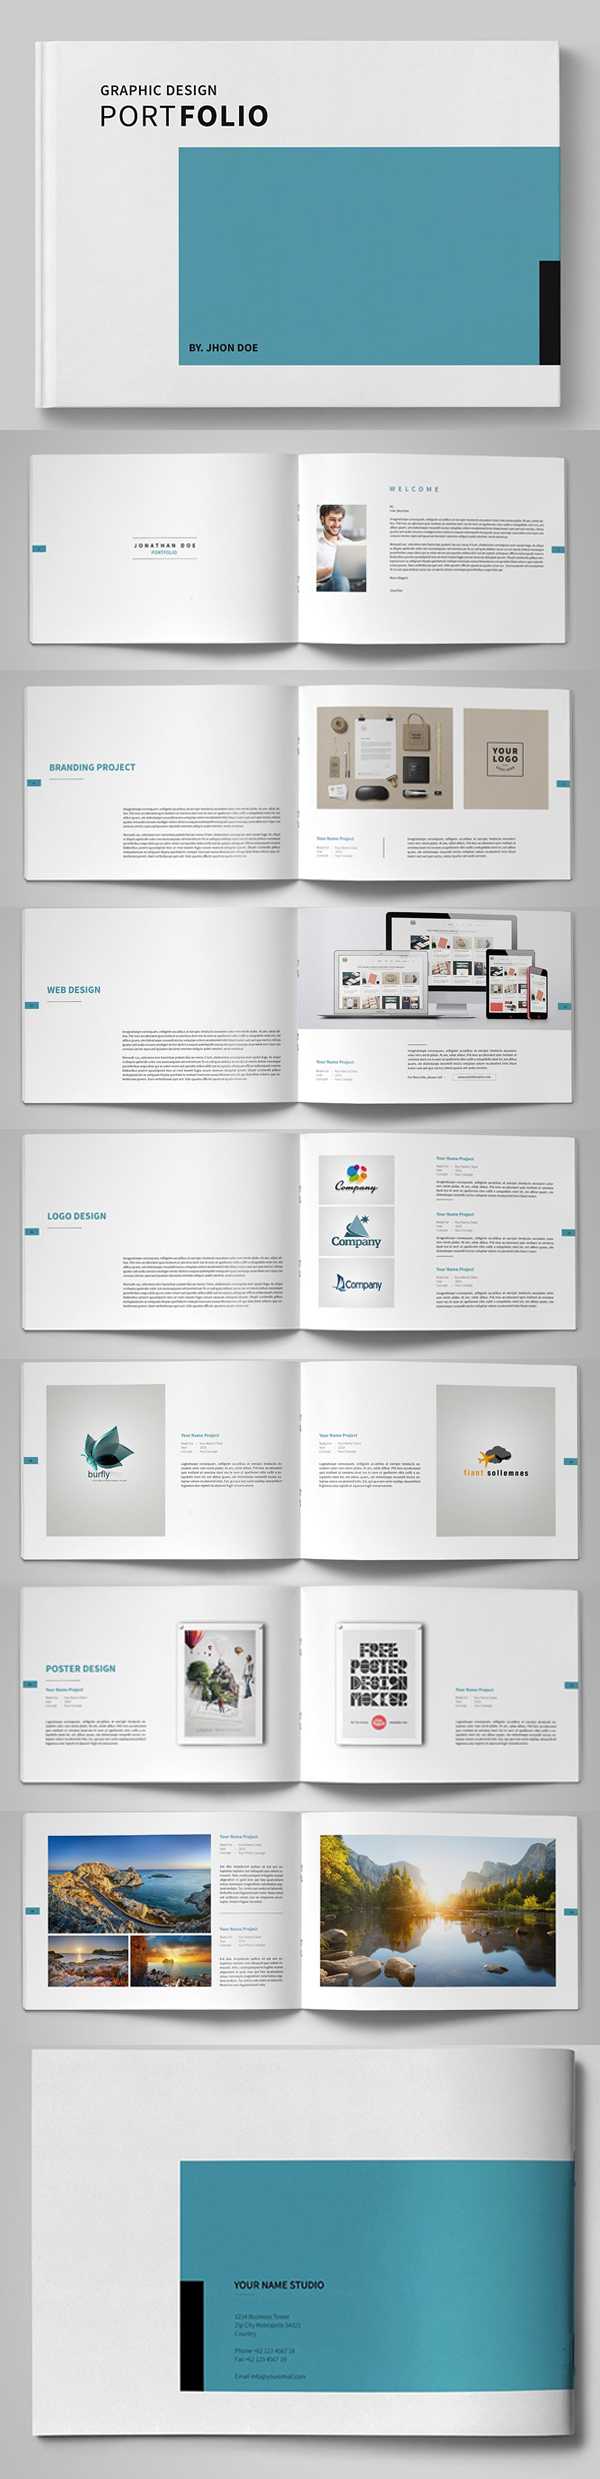 20 New Professional Catalog Brochure Templates | Design Within Indesign Templates Free Download Brochure